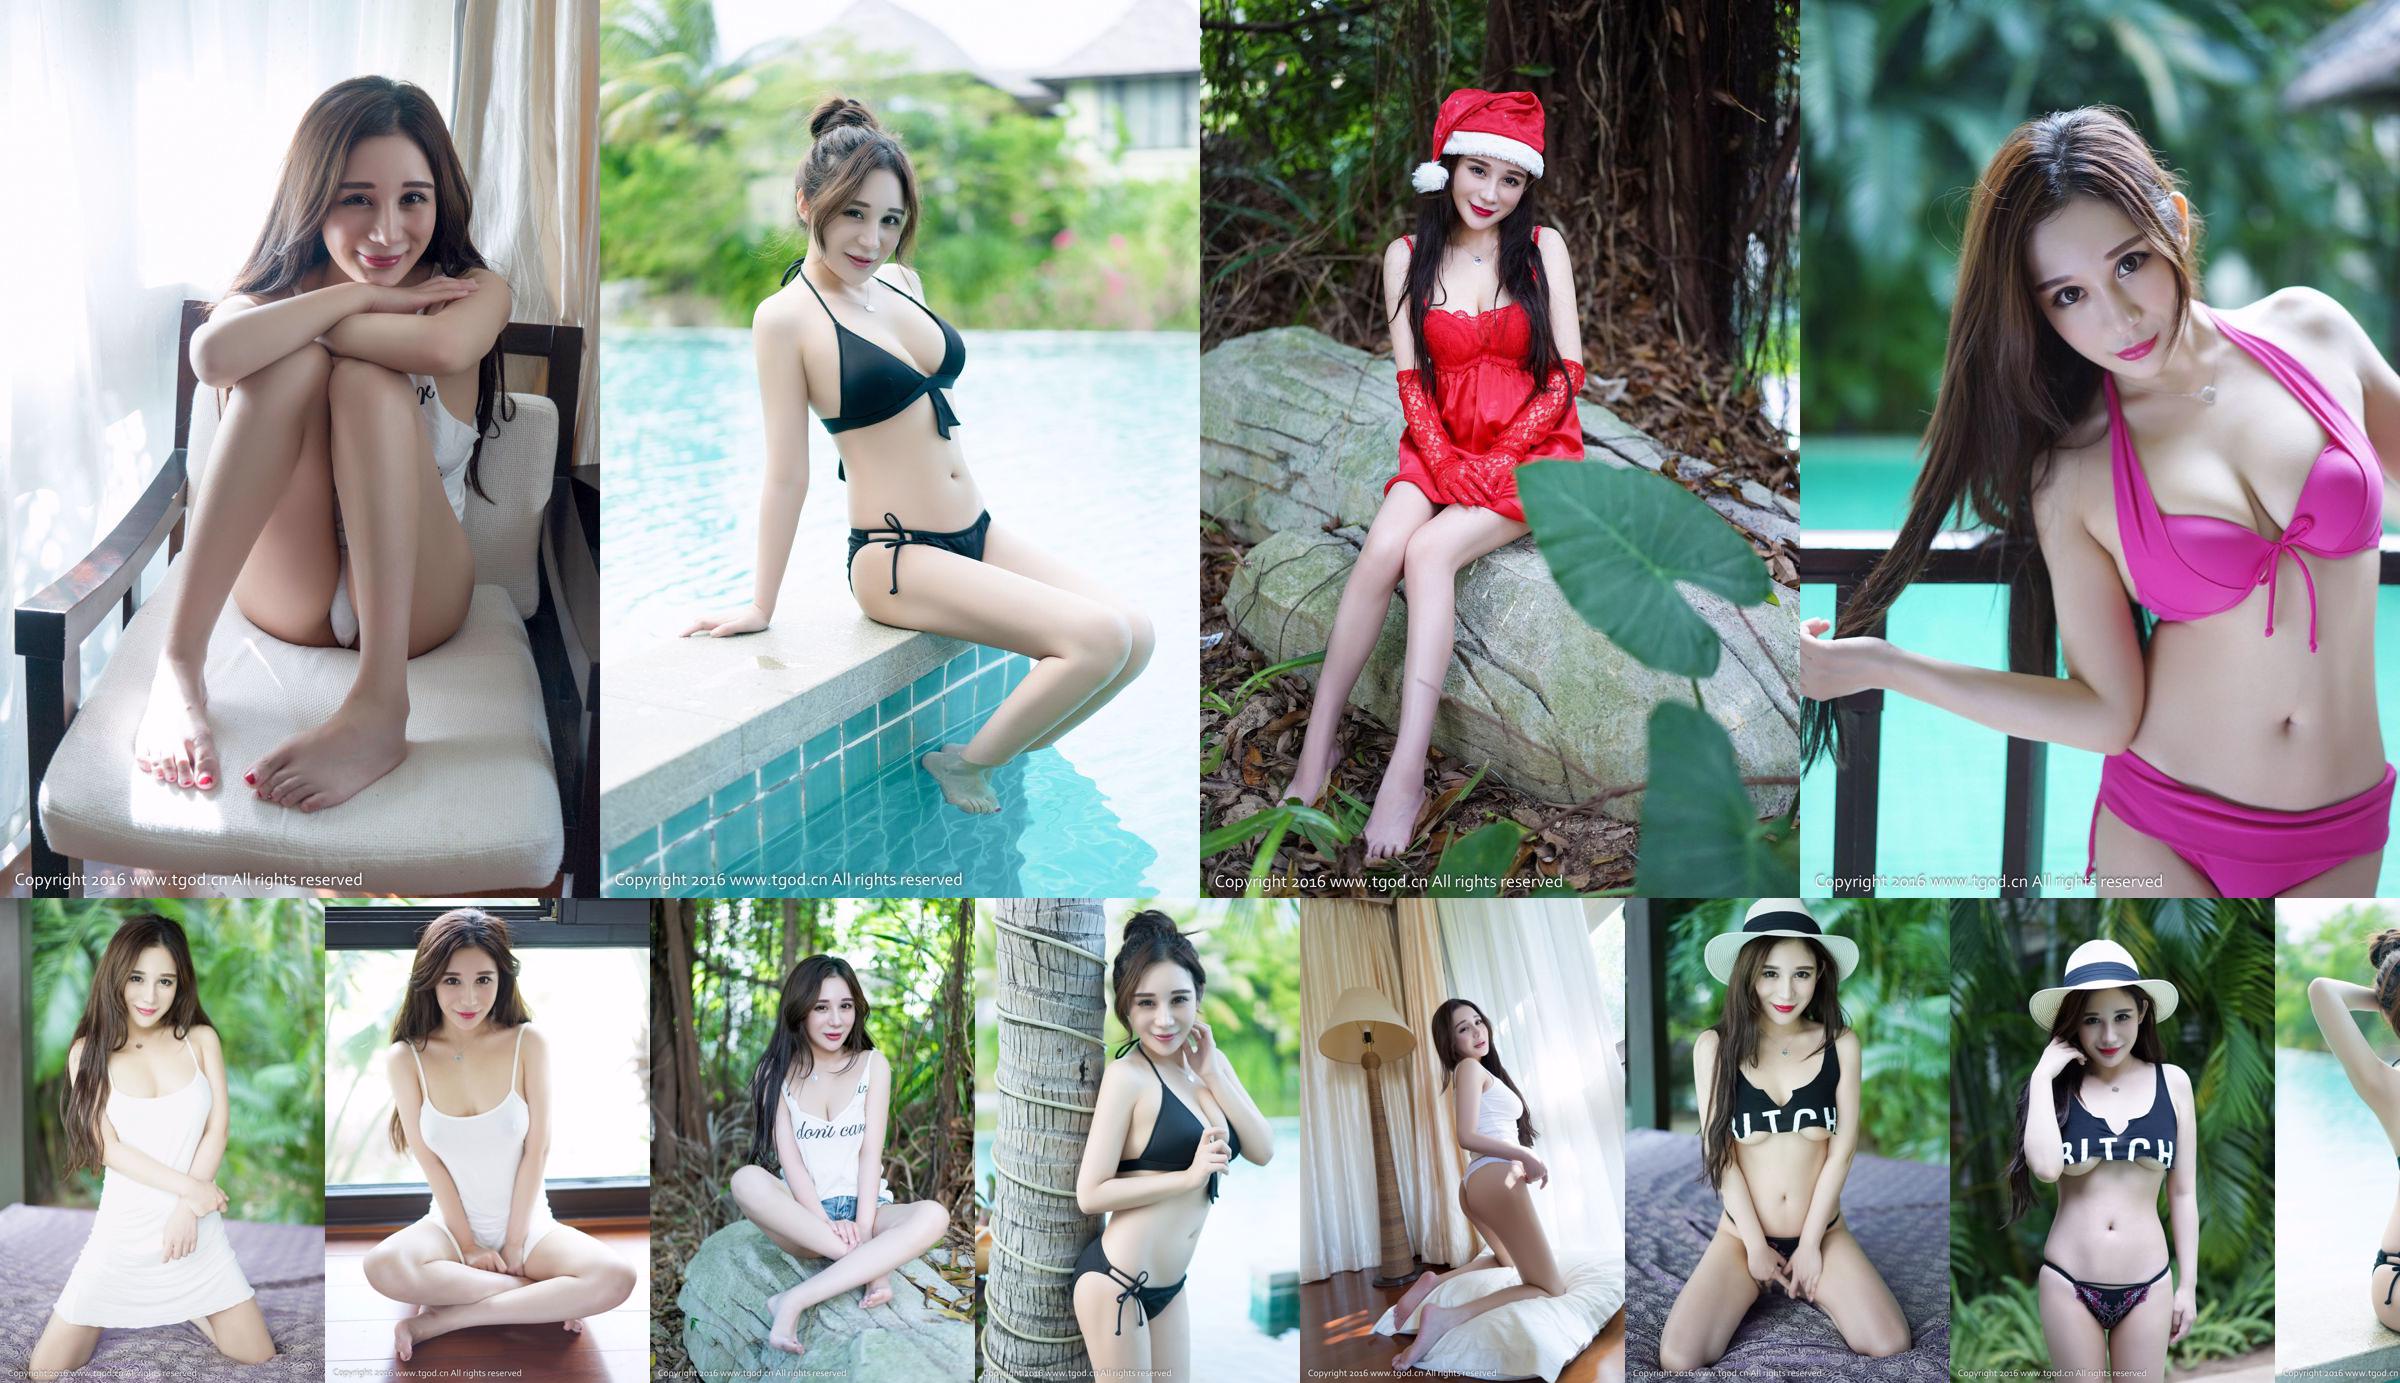 Chen Jiayao, AYomi's "Sanya Travel Shooting", fell in love with her at first sight [Push Goddess TGOD] No.6a5311 Page 4